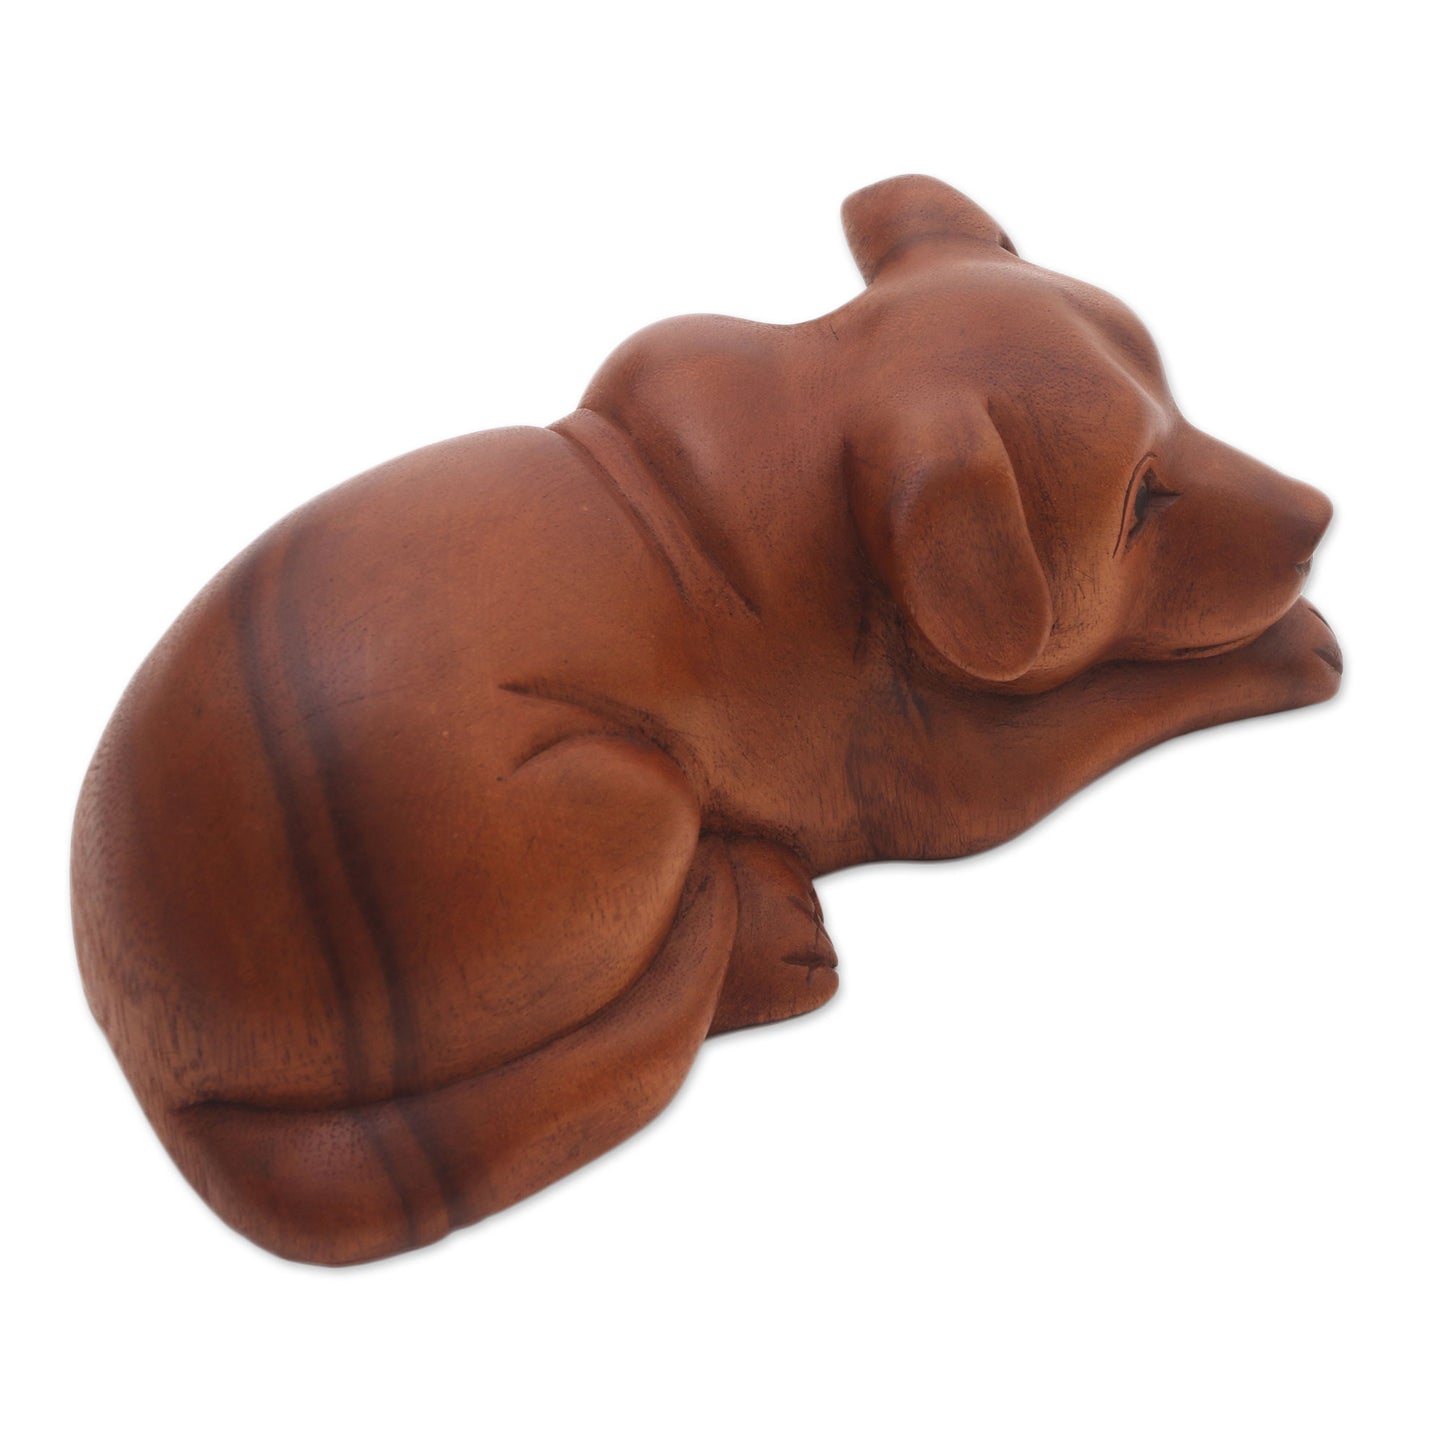 Good Boy Hand-Carved Suar Wood Dog Sculpture from Bali